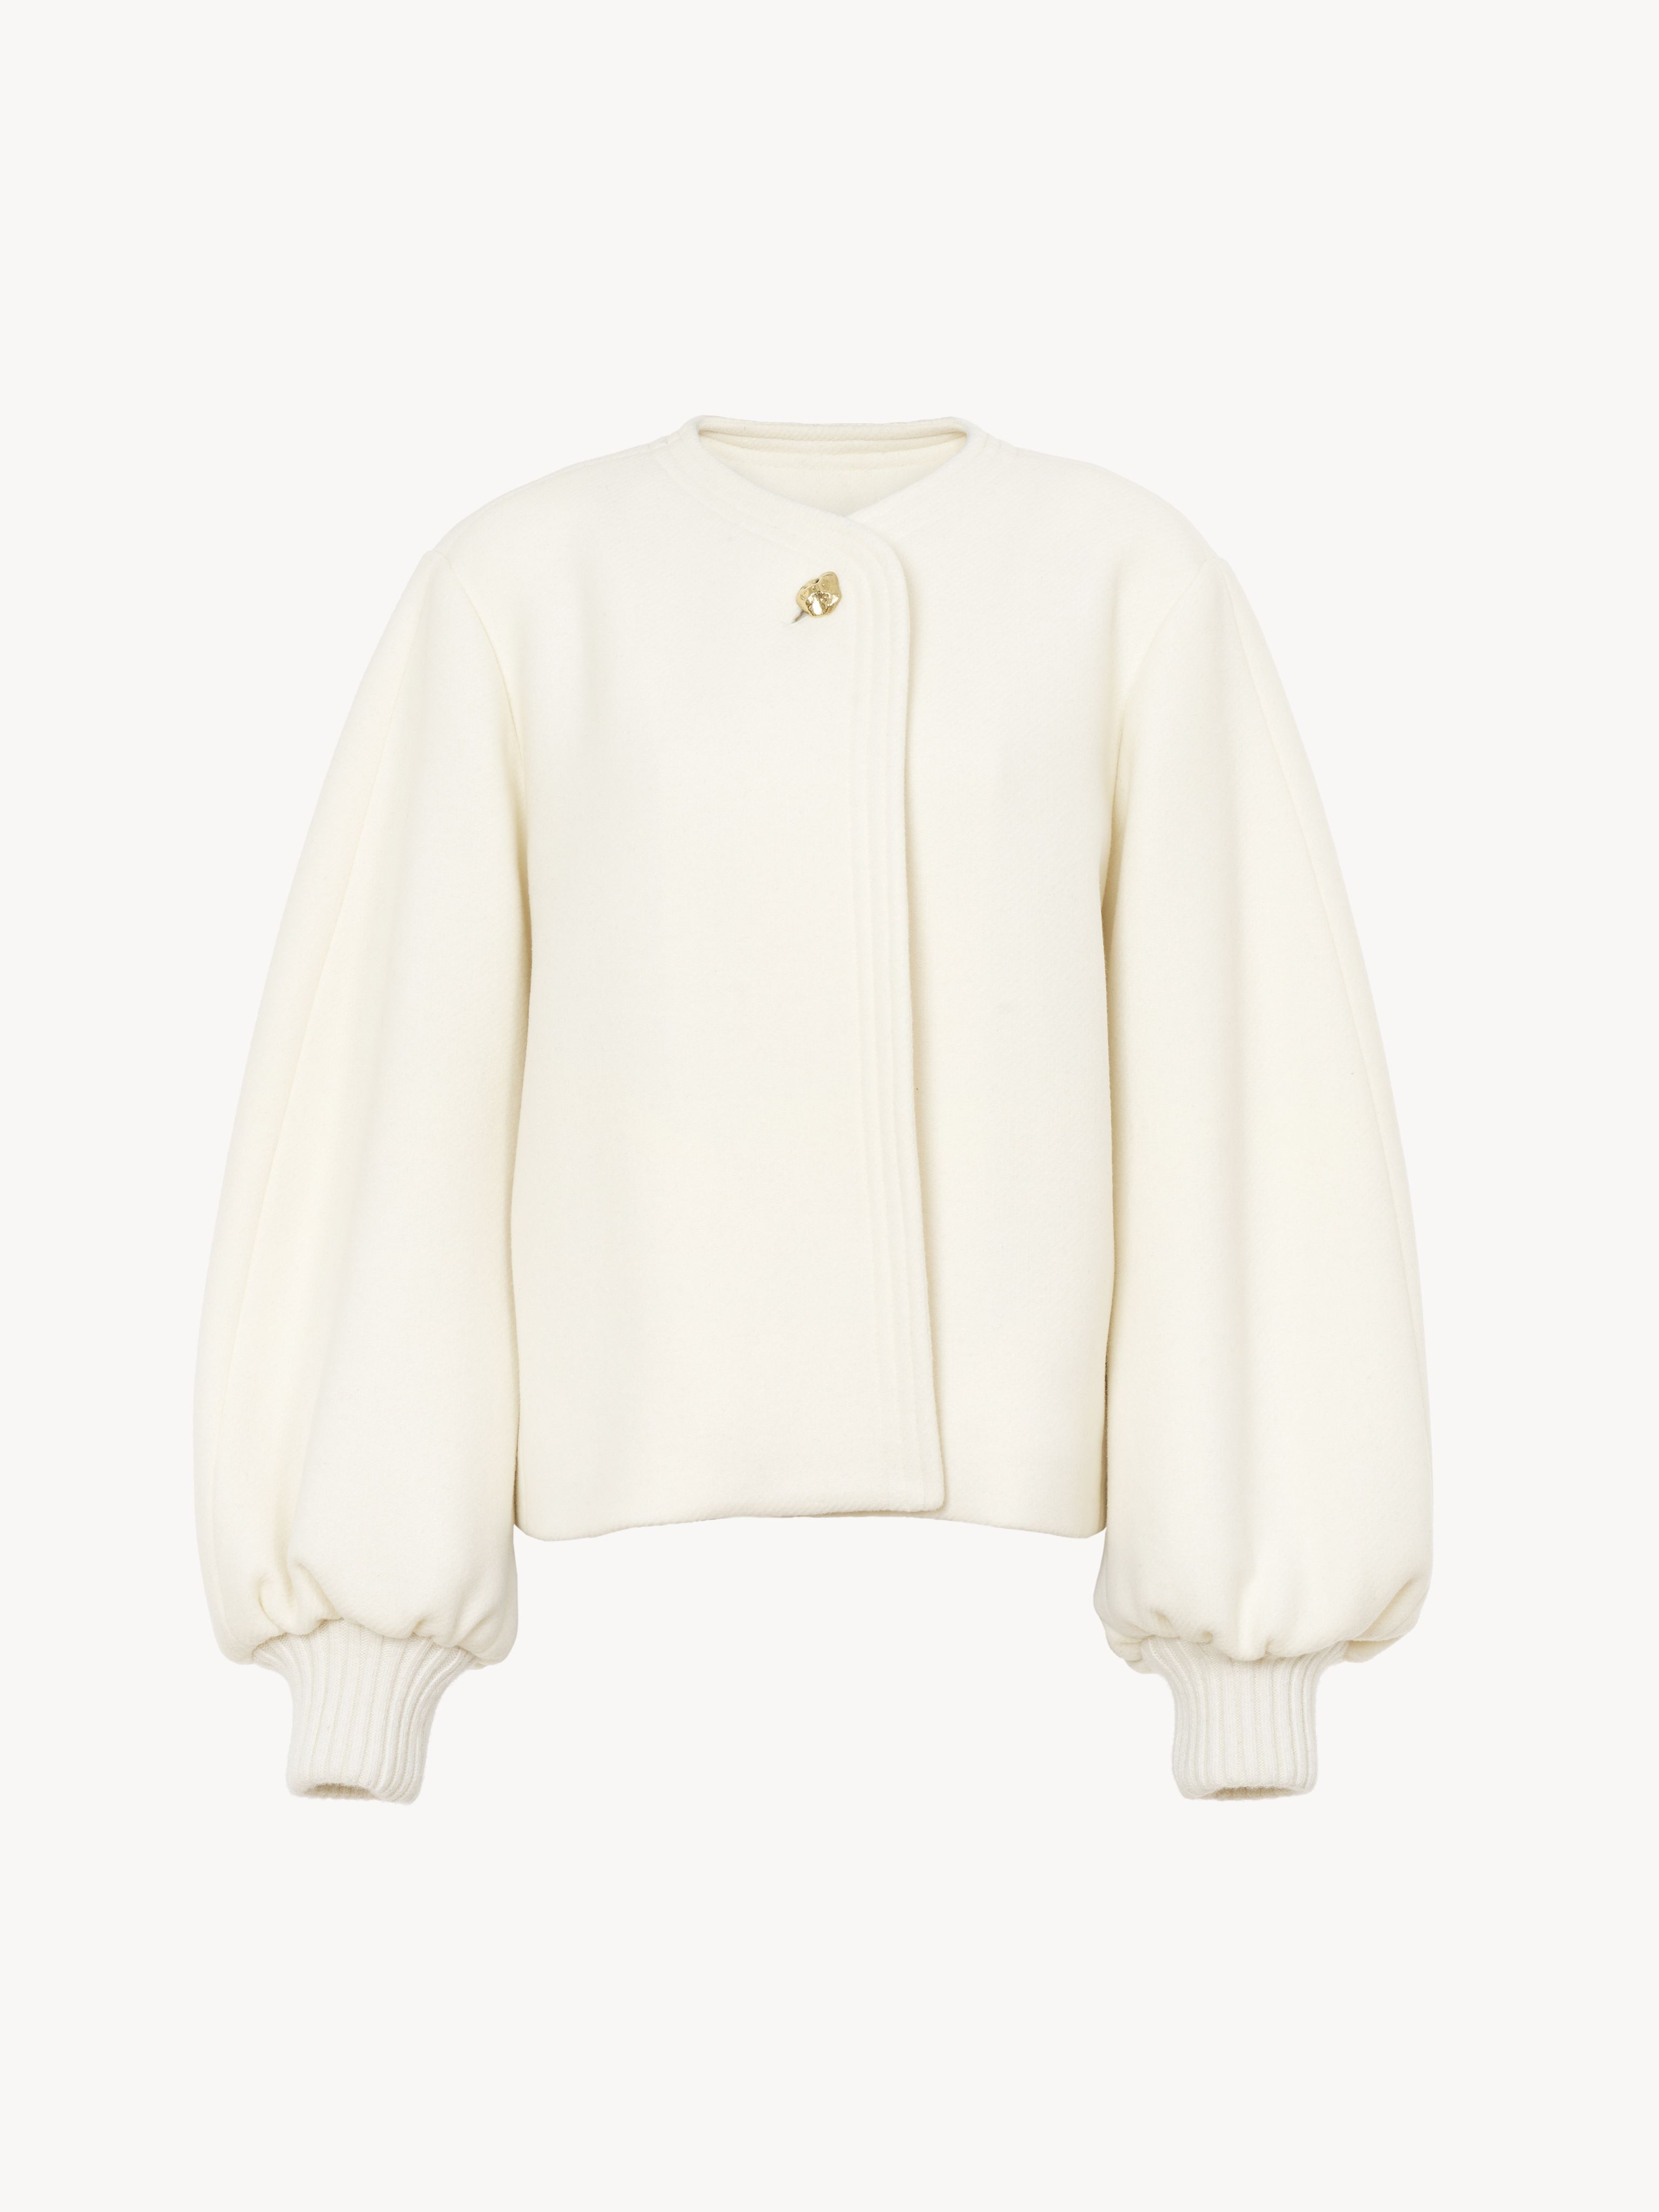 Chloé Manteau Portefeuille Court Manches Ballon Femme Blanc Taille 42 80% Laine Vierge, 20% Polyamide, Hor In White